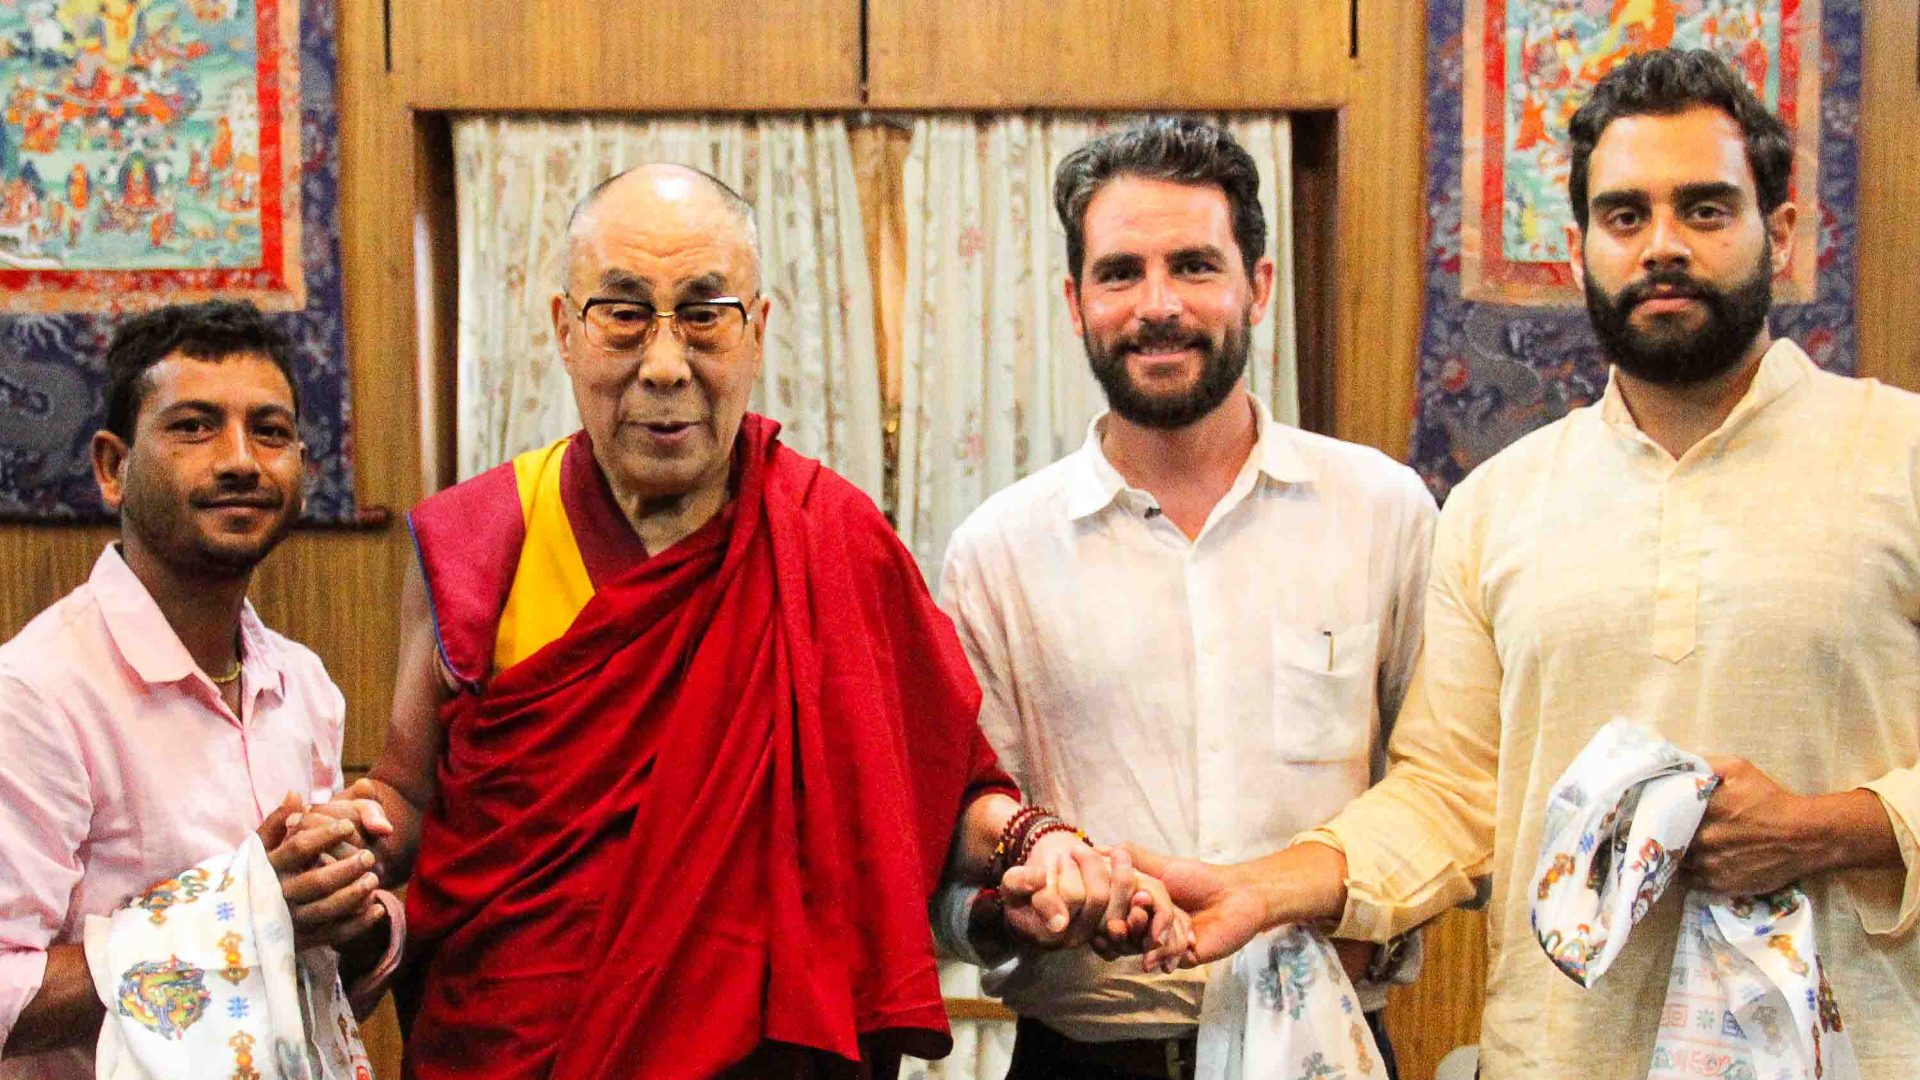 Ash stands with the Dalai Lama and some other people.